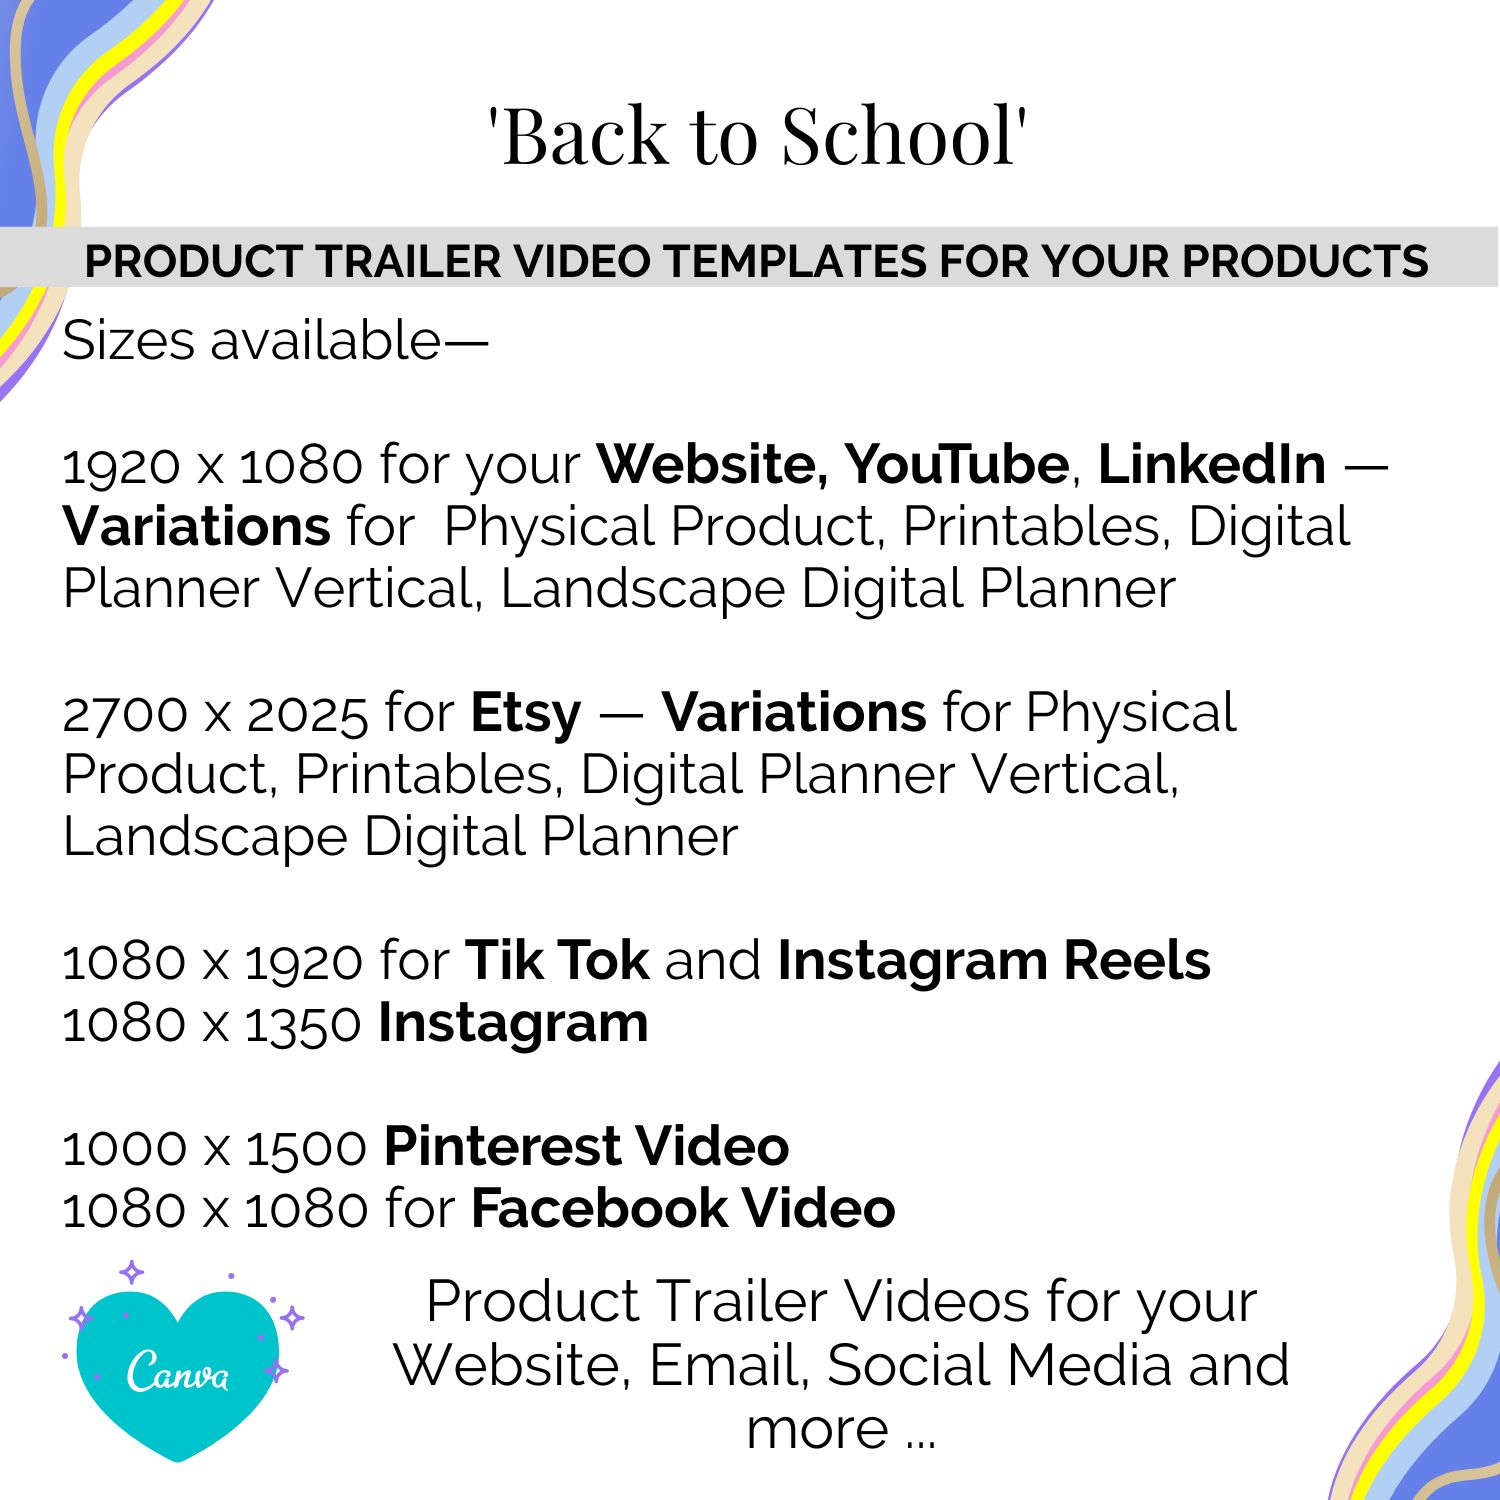 Back to School Video Promo Templates